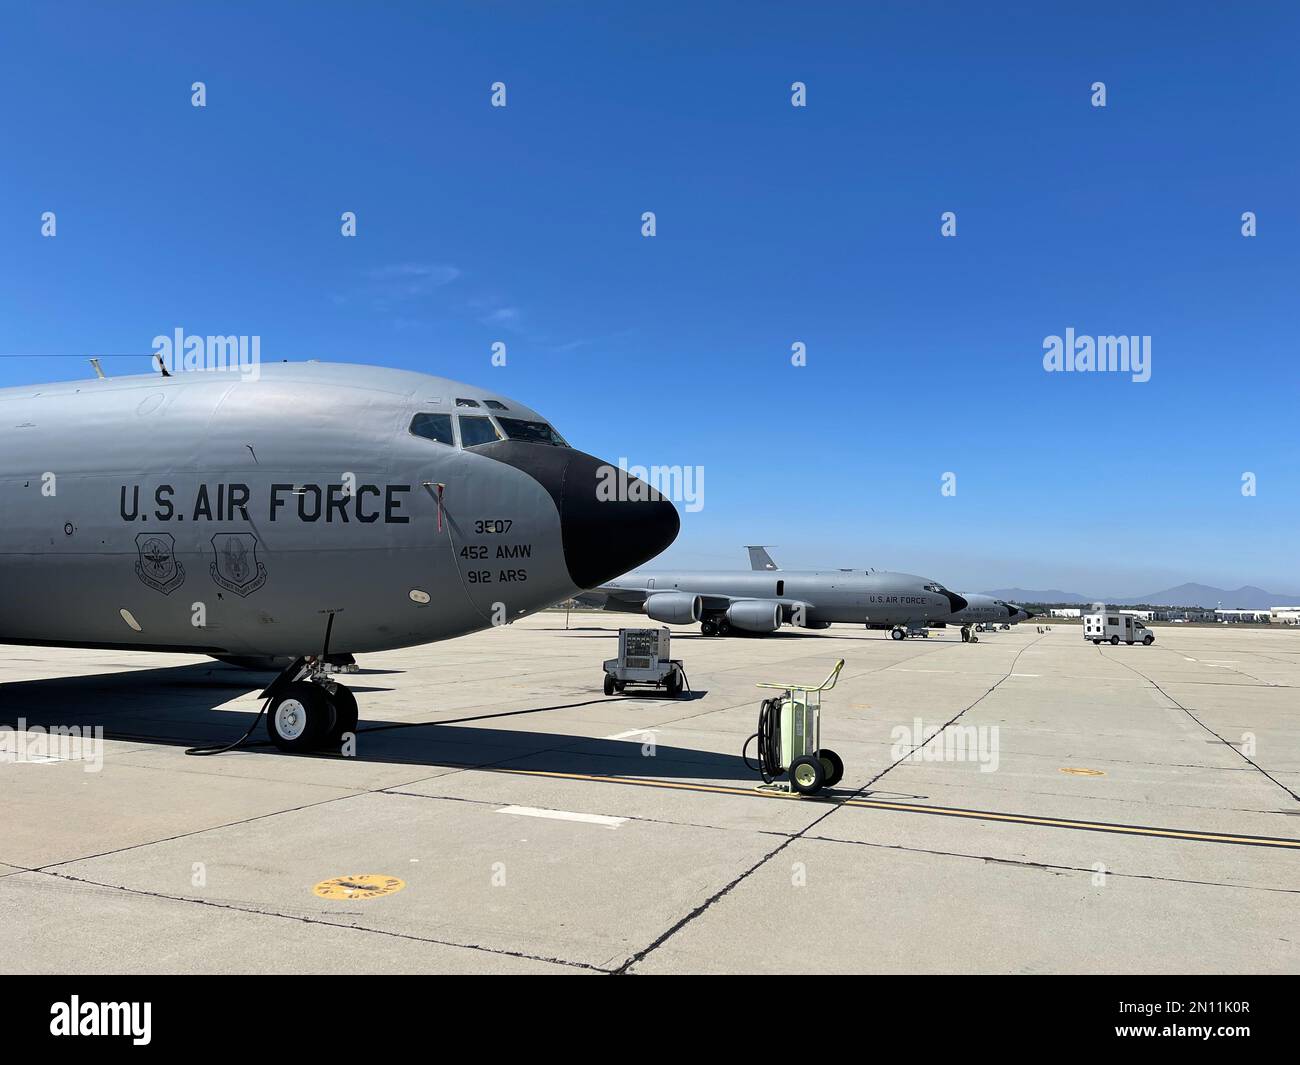 U.S. Air Force 336th Air Refueling Squadron photos and B-Roll video at March Air Reserve Base, California June 07, 2022. The 336th ARS is the first Air Force Reserve flying unit to fly the KC-135 Stratotanker. The 336th maintains round the clock readiness support to March Air Reserve Base and Air Mobility Command's airlift and air refueling requirements. (U.S. Air Force photo by Staff Sergeant Kekoa Santiago) Stock Photo